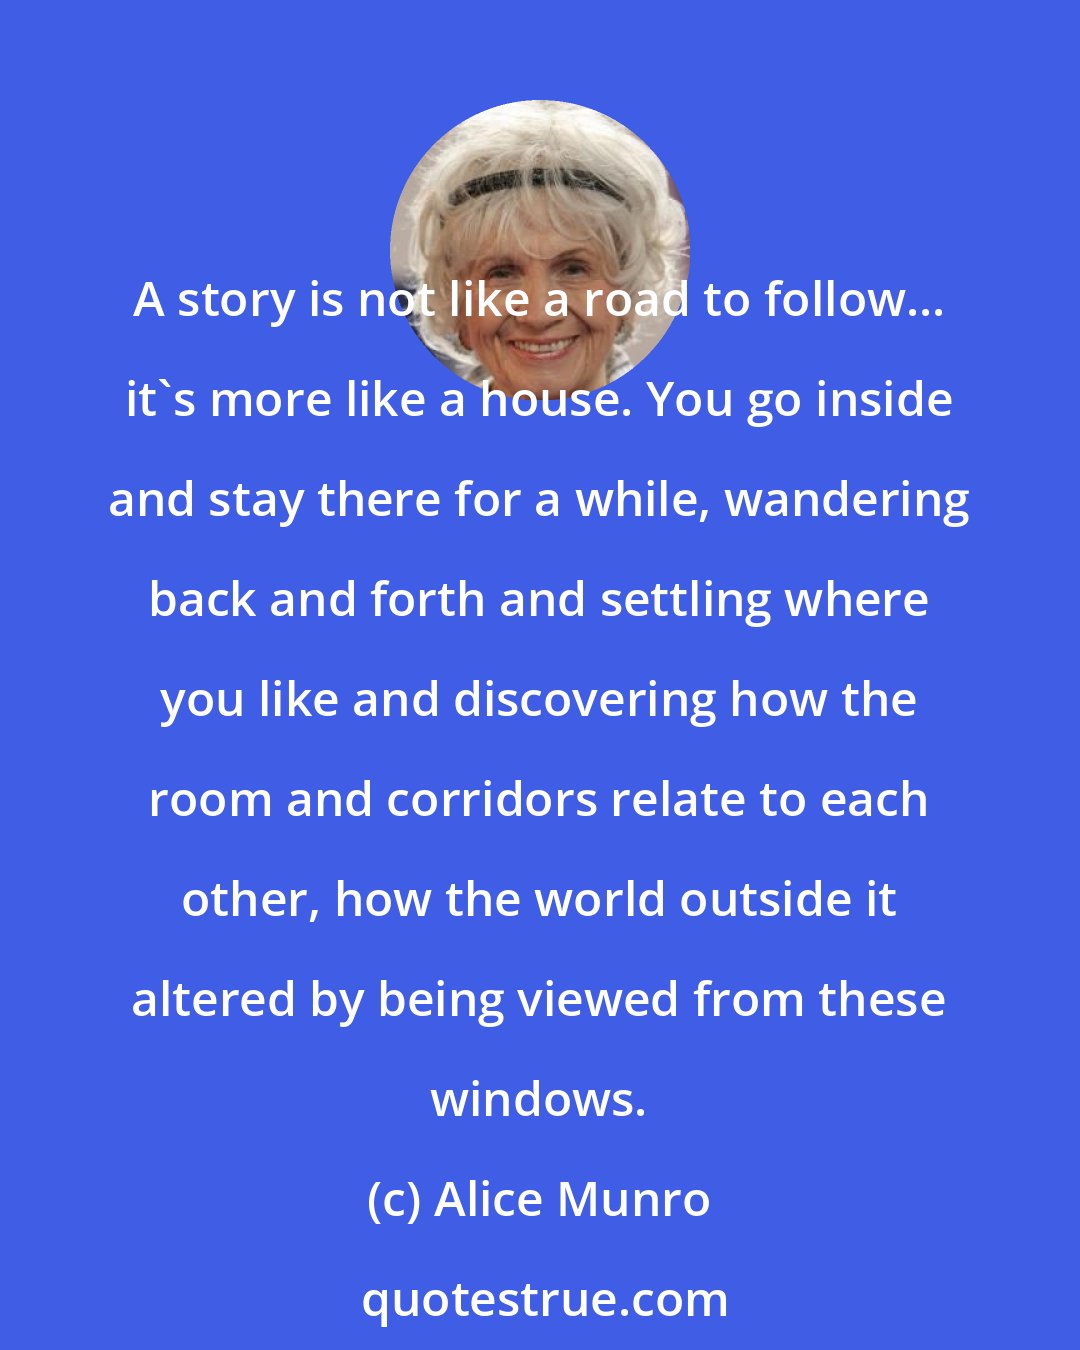 Alice Munro: A story is not like a road to follow... it's more like a house. You go inside and stay there for a while, wandering back and forth and settling where you like and discovering how the room and corridors relate to each other, how the world outside it altered by being viewed from these windows.